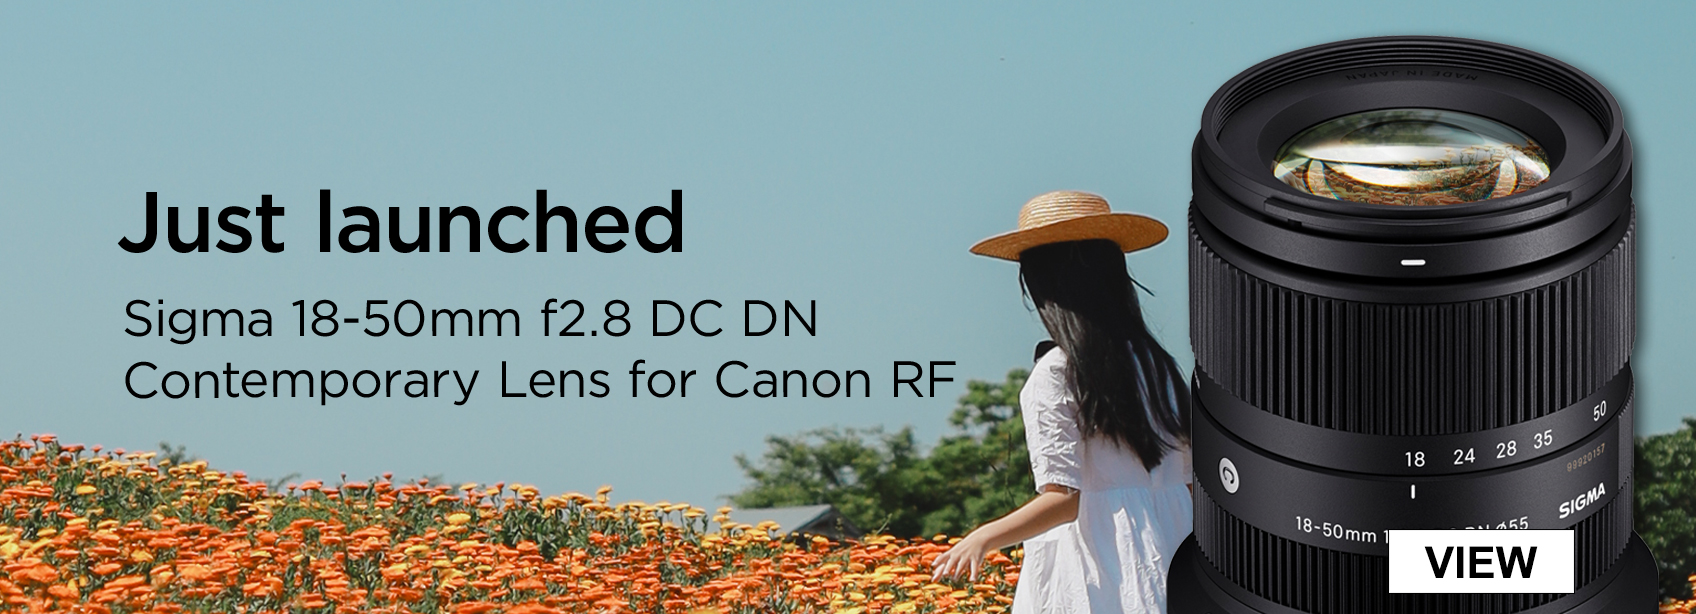 Just Launched Sigma 18-50mm f2.8 DC DN Contemporary Lens for Canon RF